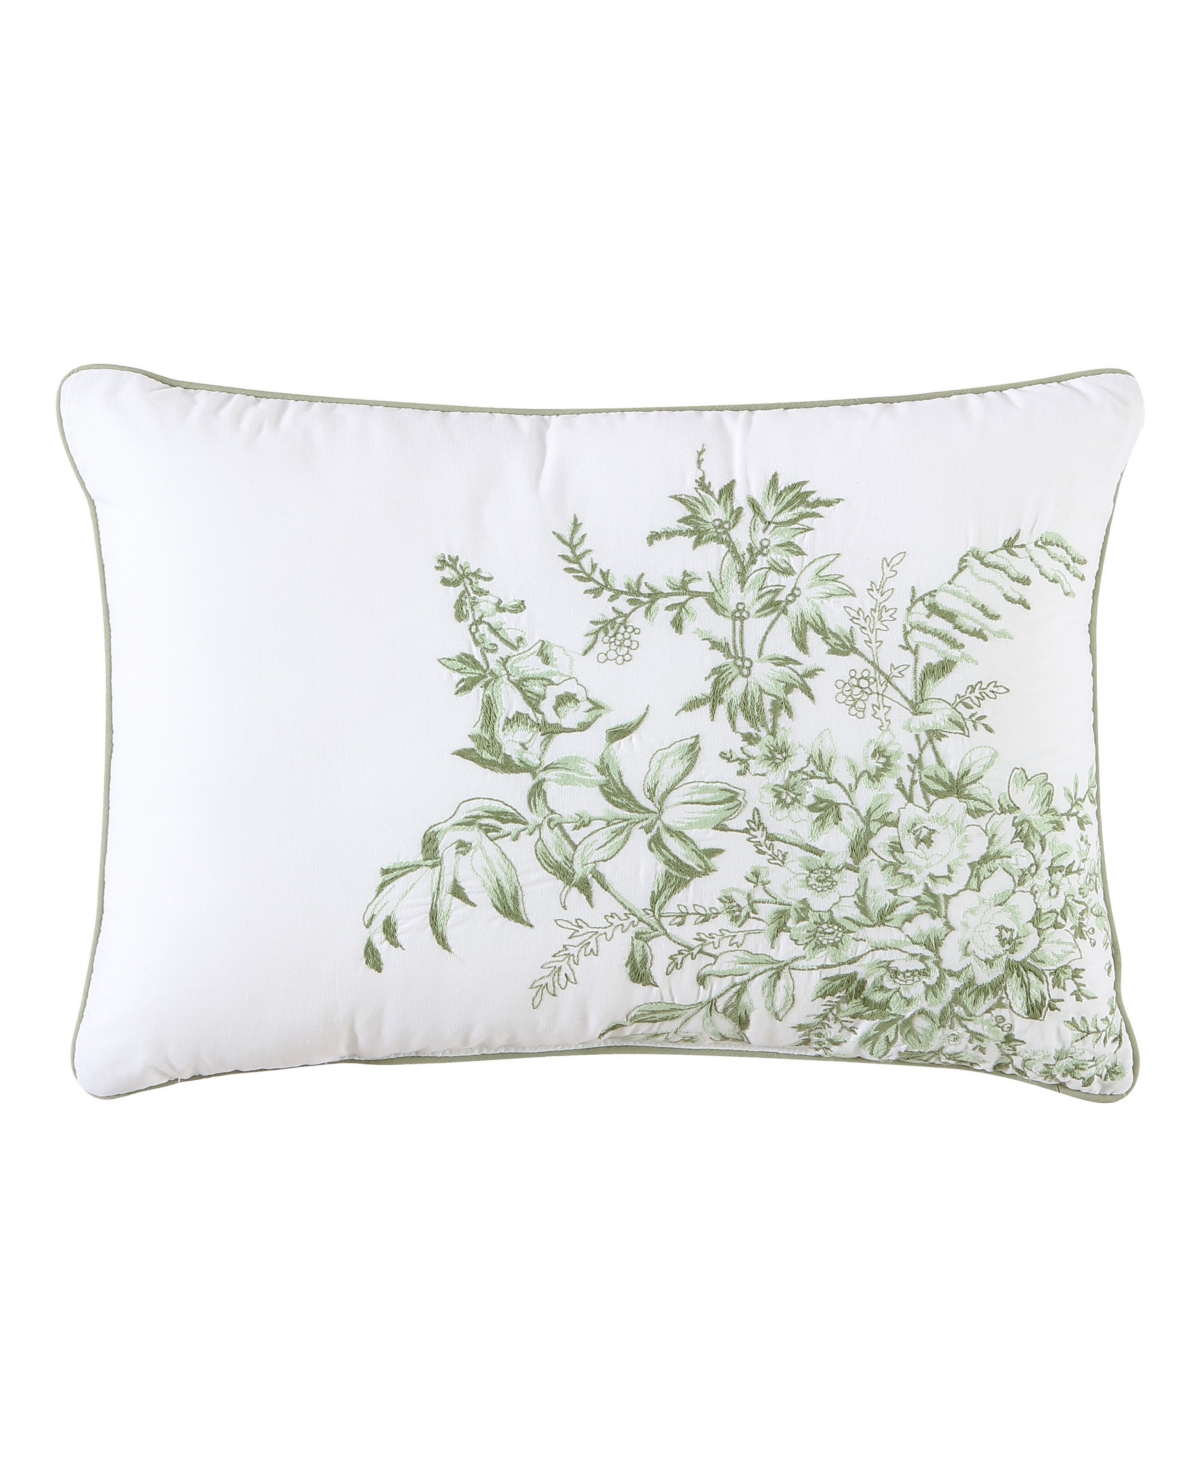 Laura Ashley Harper Embroidered Decorative Pillow, 18" X 18' Bedding In Sage